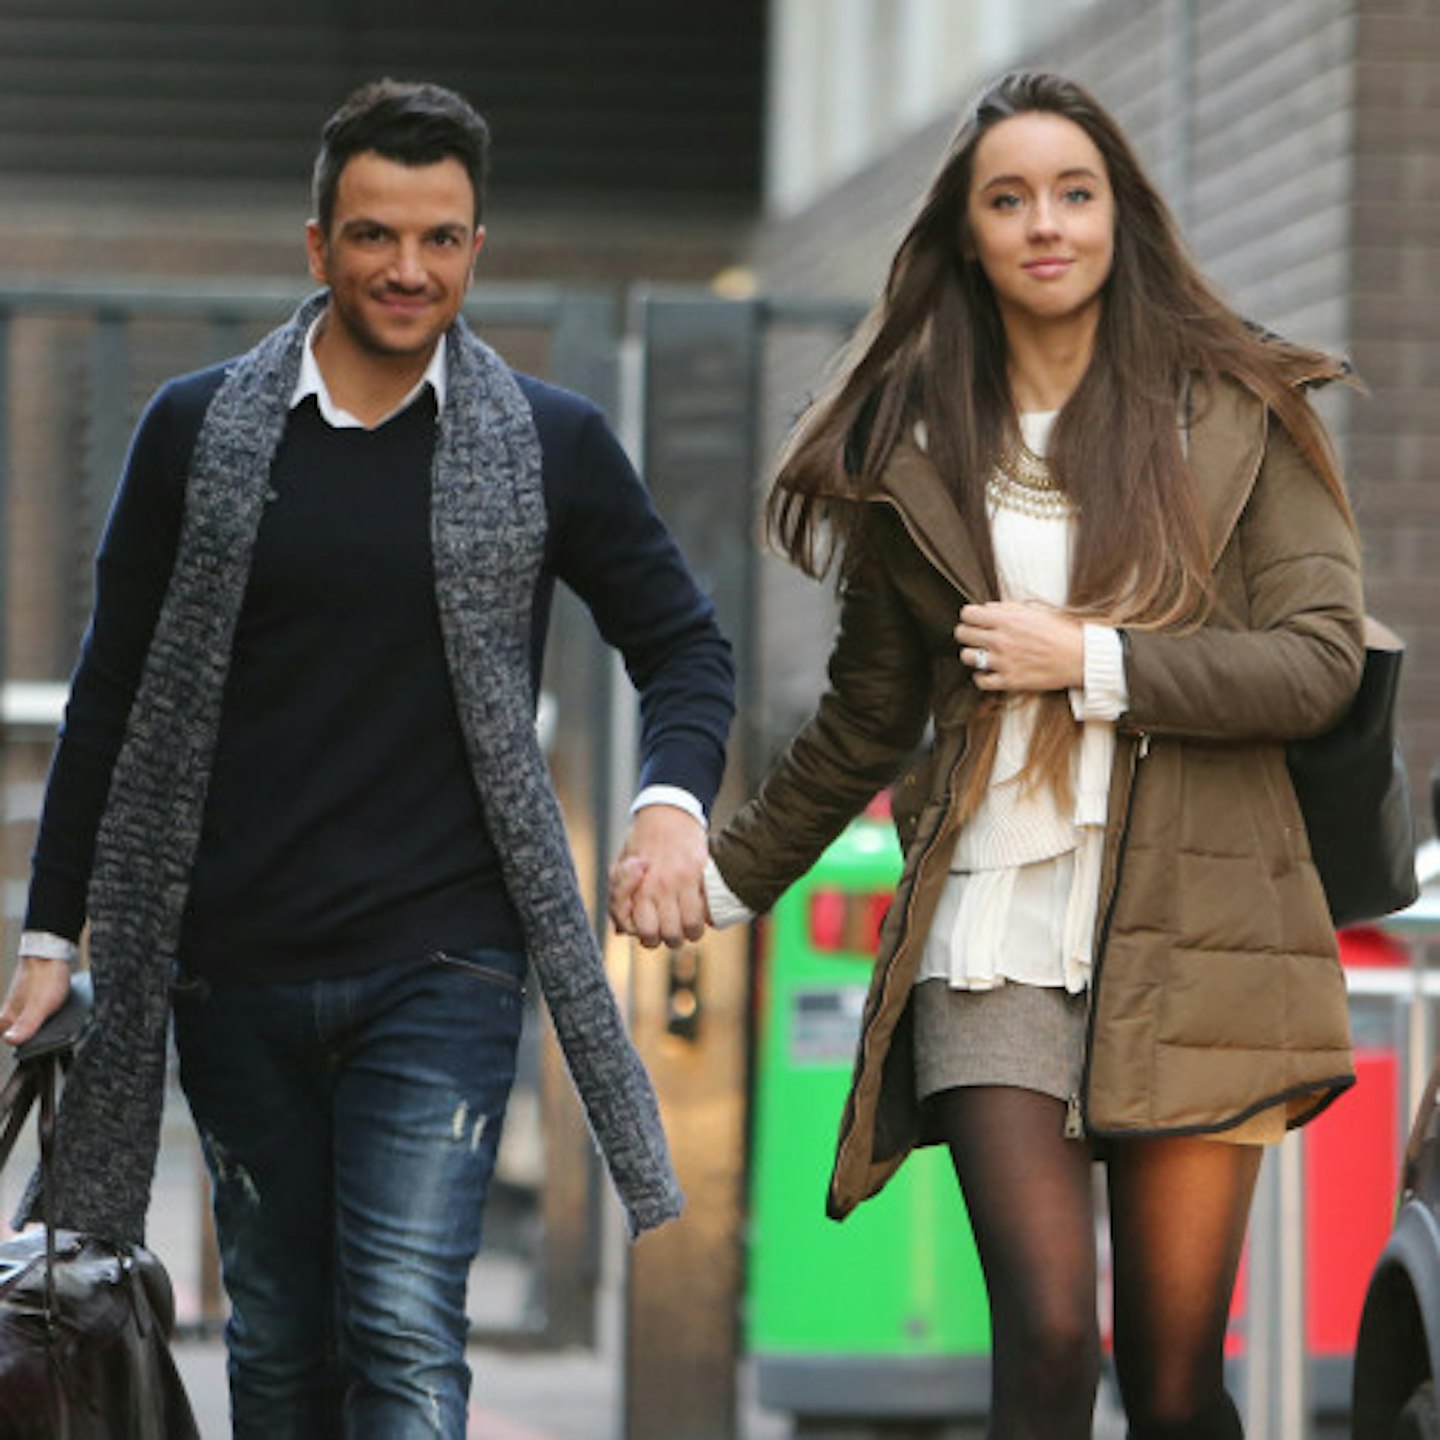 Peter Andre with fiancée Emily MacDonagh